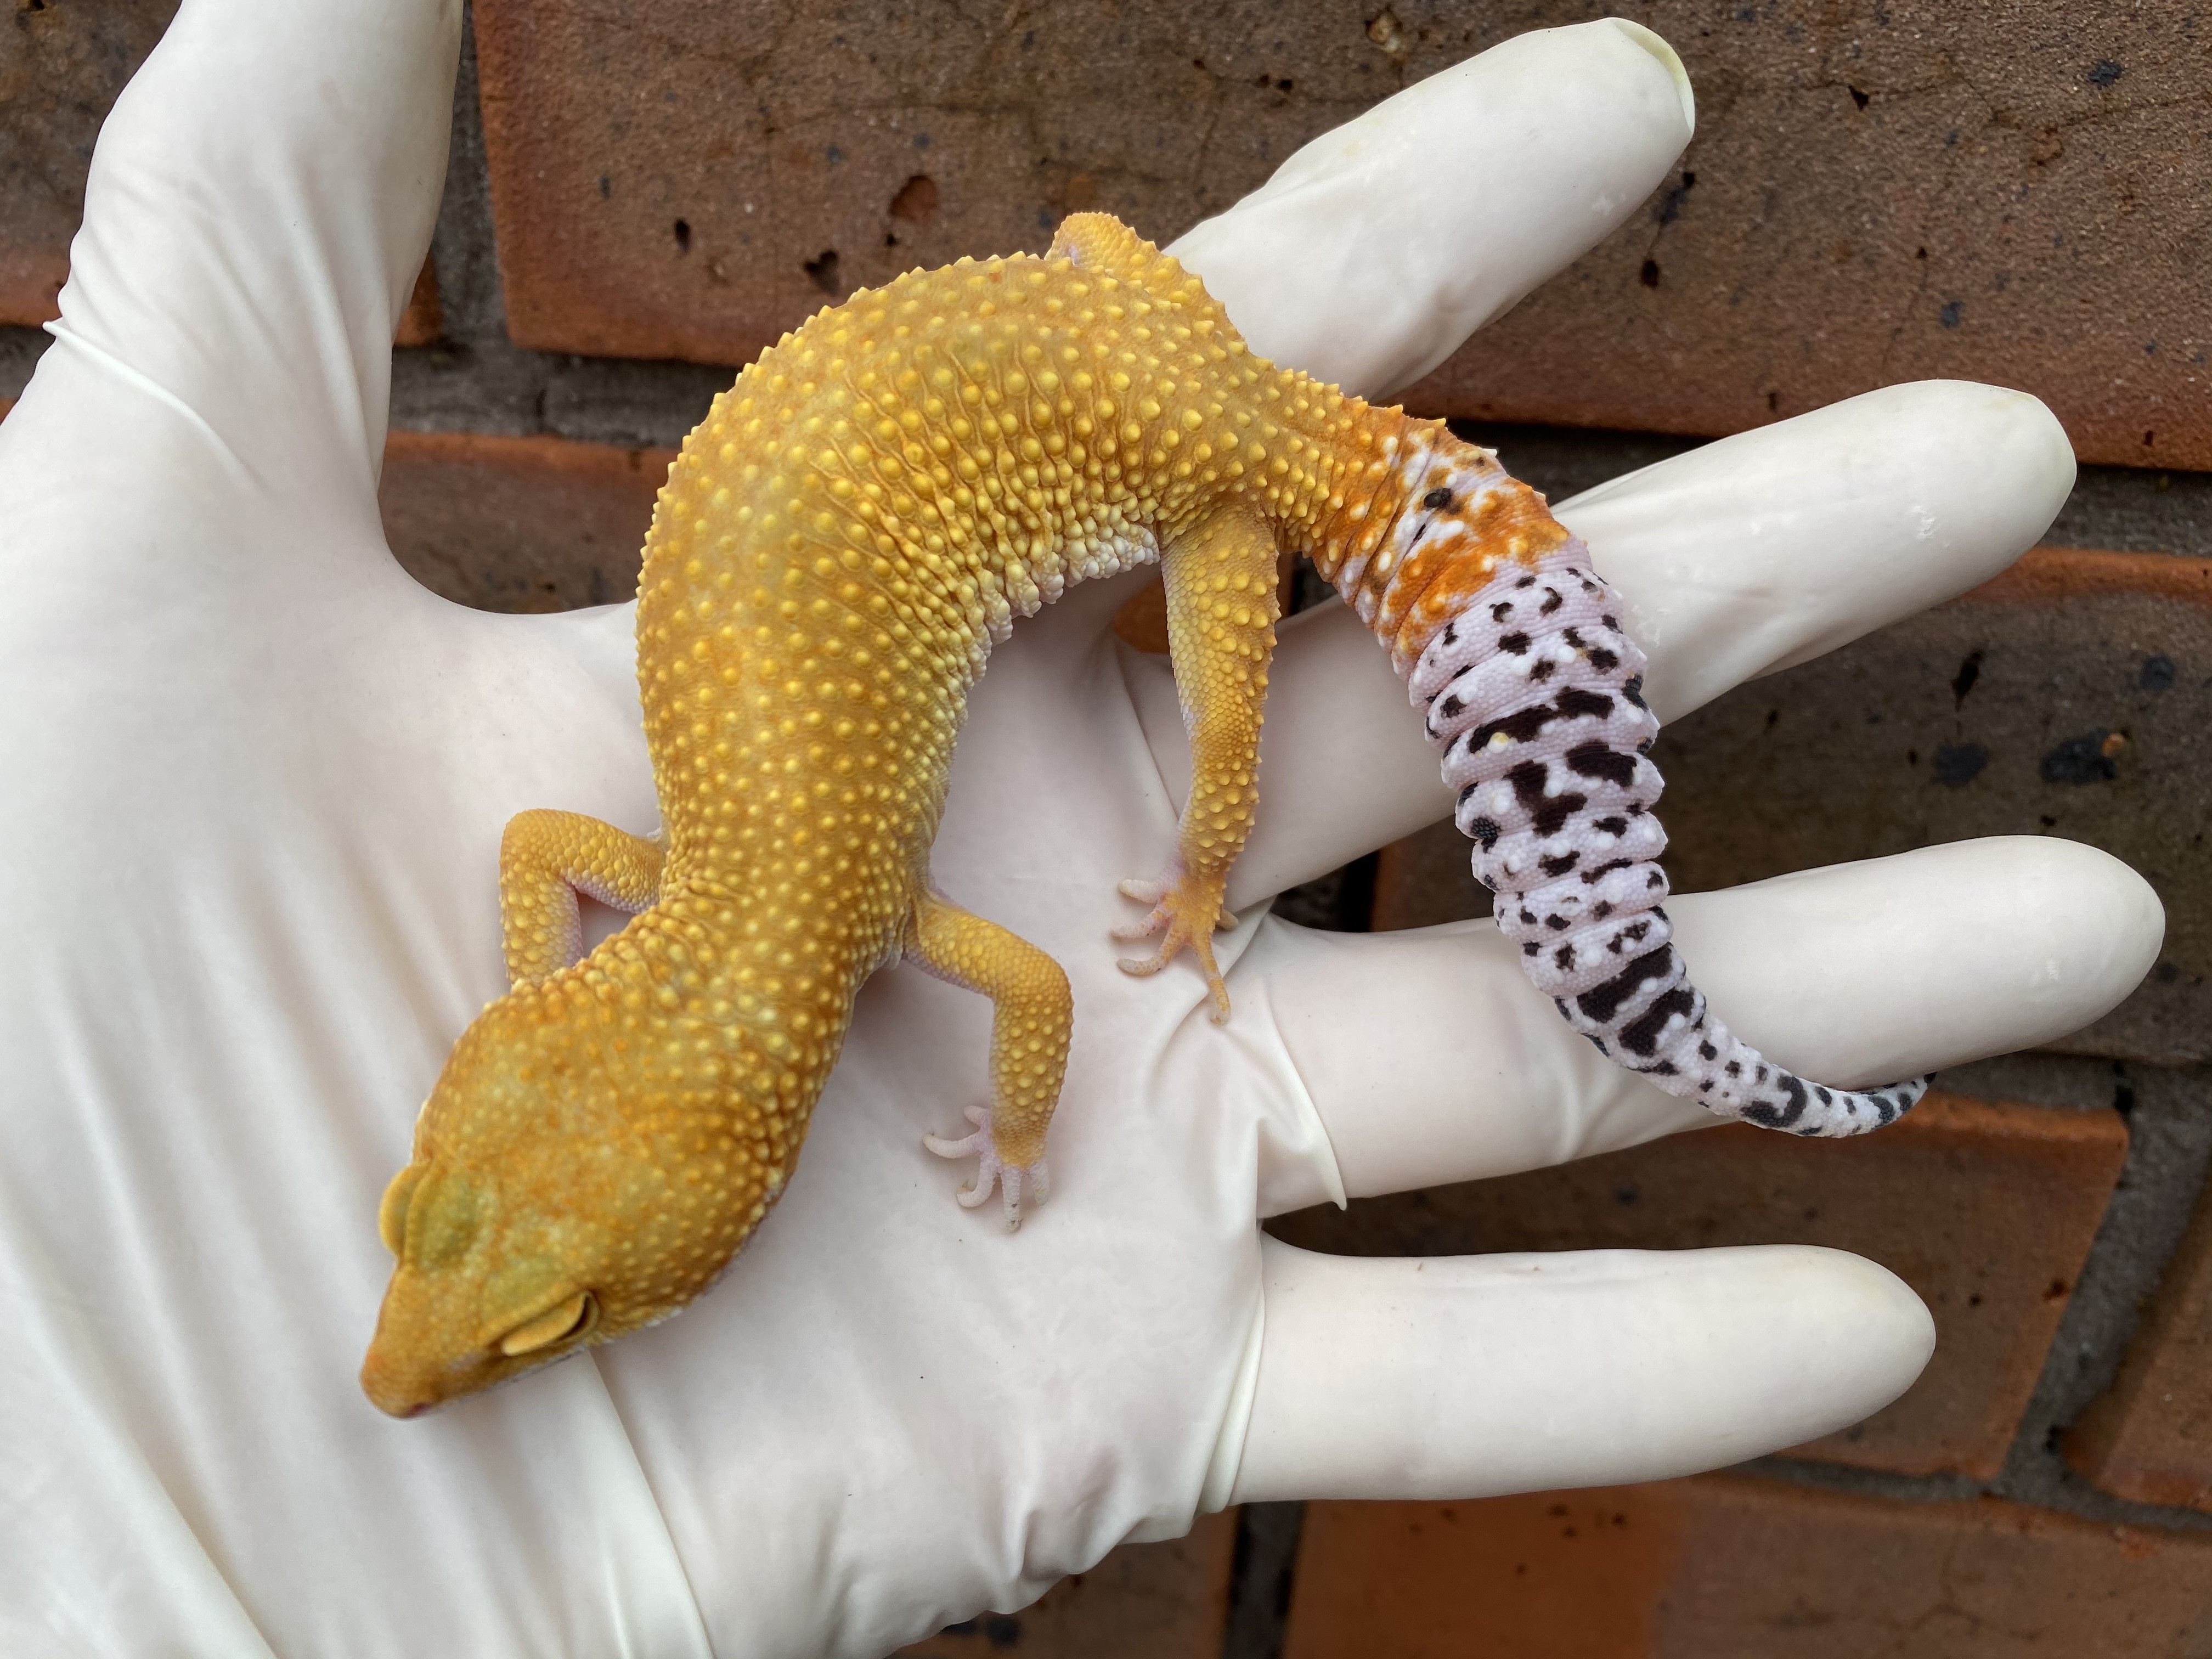 Super Hypo Leopard Gecko by Crystal Palace Reptiles